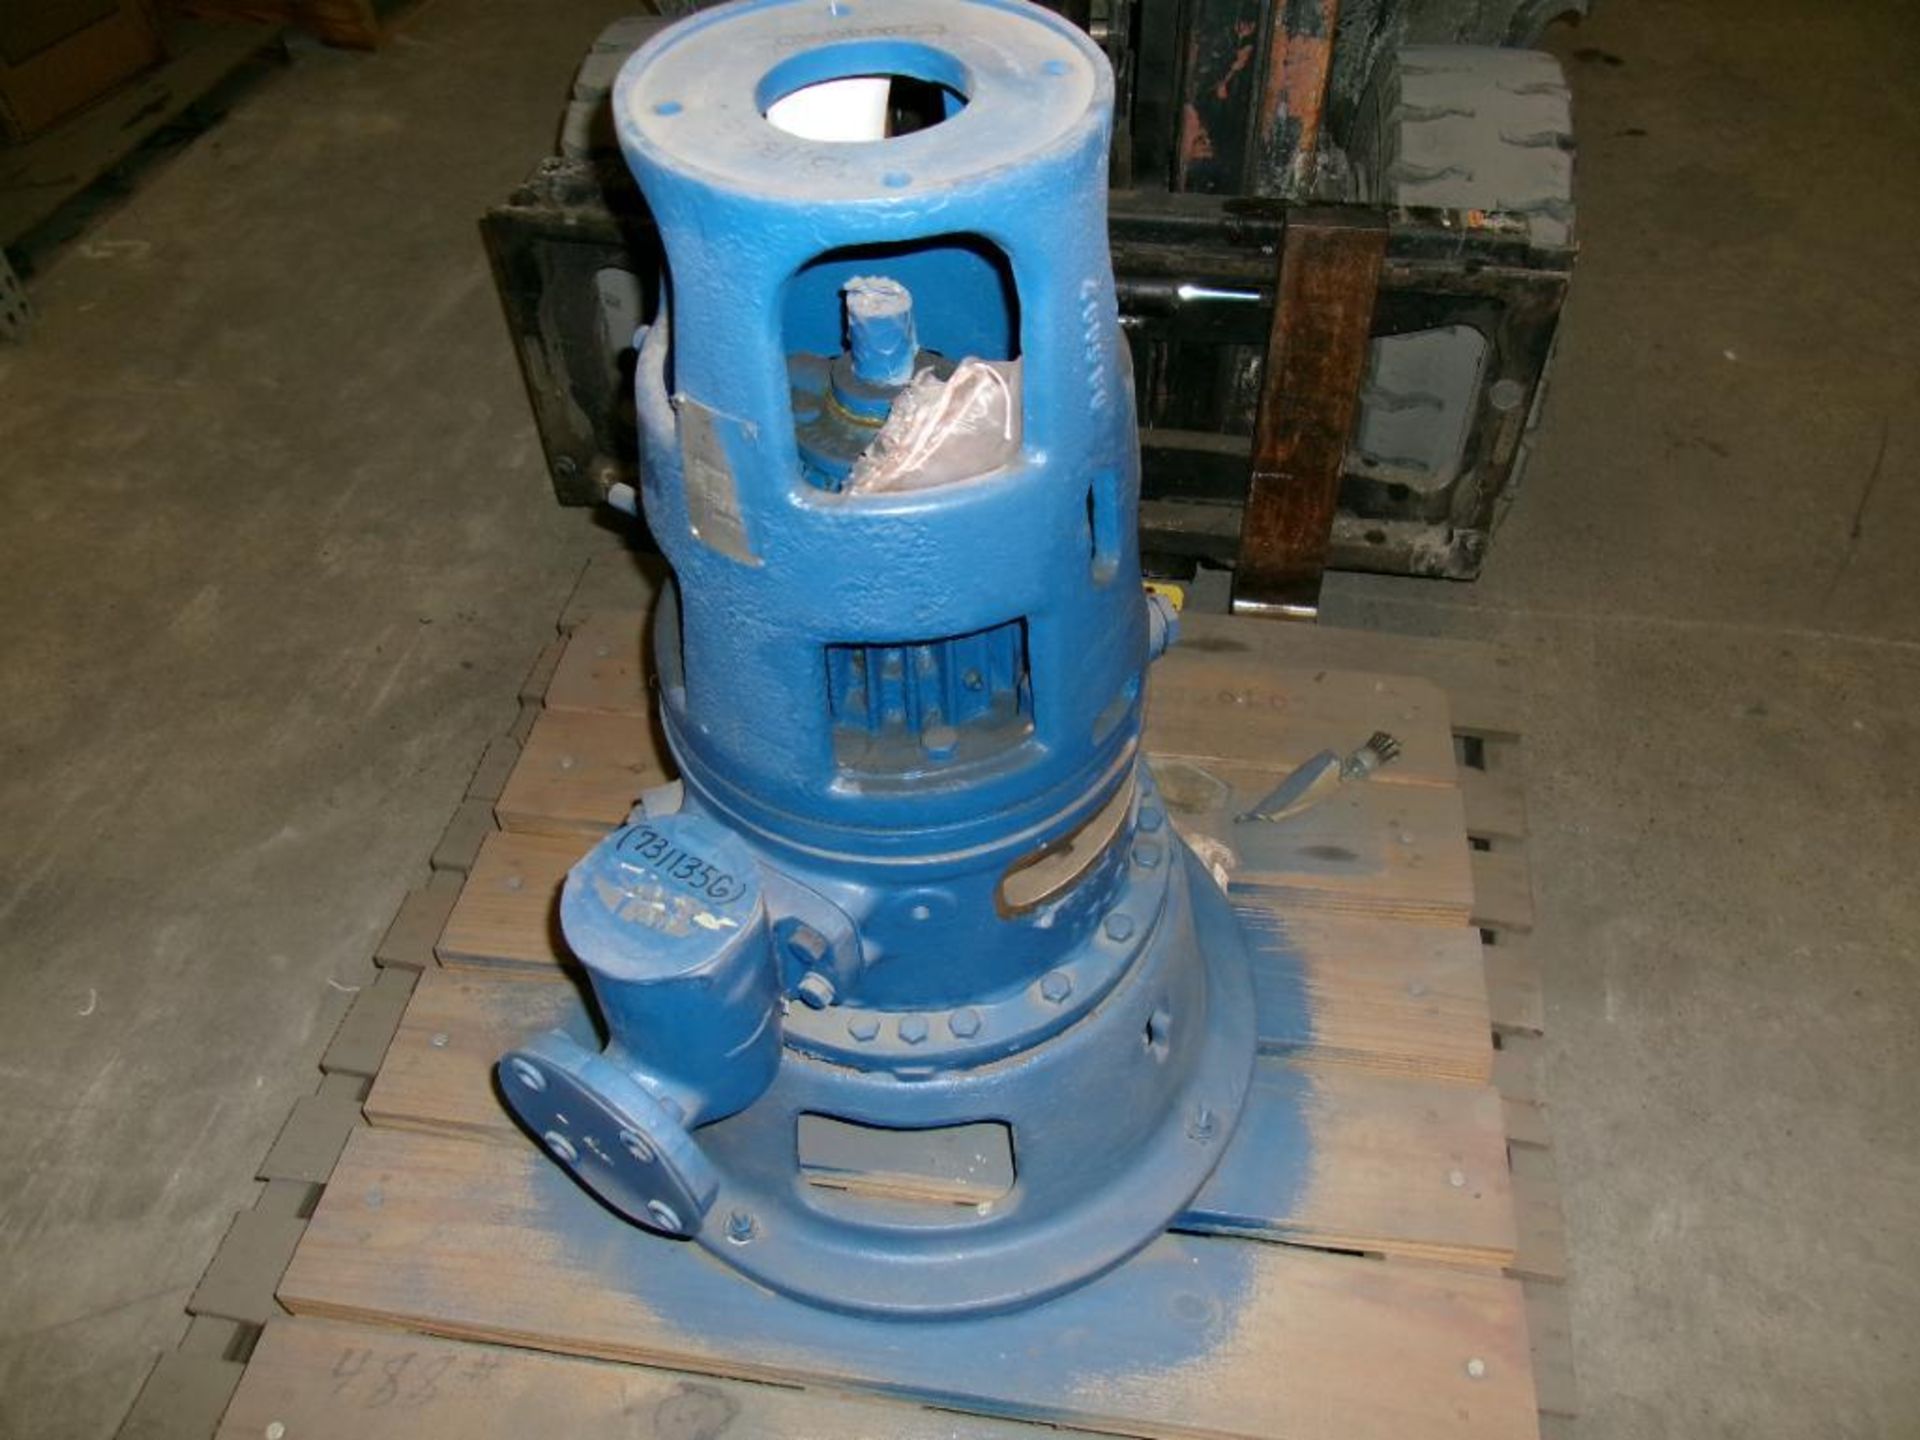 Labour Vertical Self-Priming Pump, Size 11, Series G, 1750 RPM (New) - Image 2 of 4